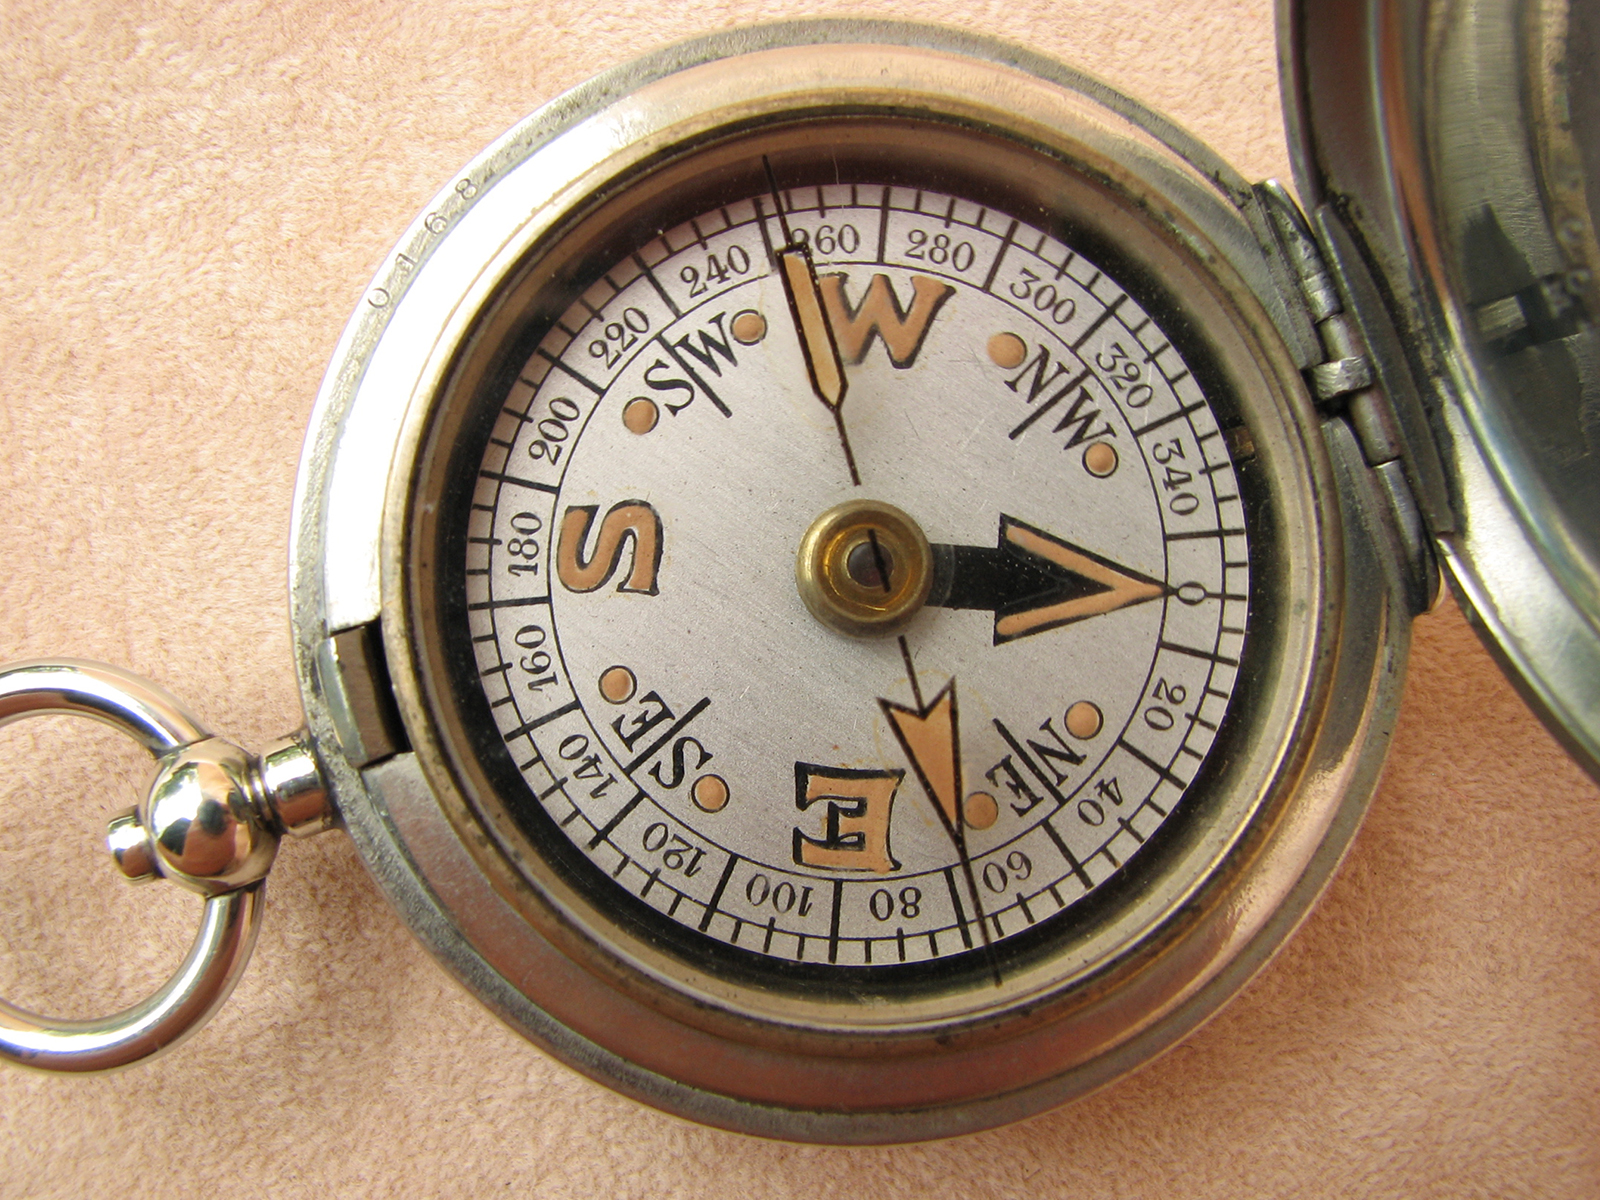 WW1 Military Souvenir compass owned by Major Lensh MBE Egyptian Expeditionary Force